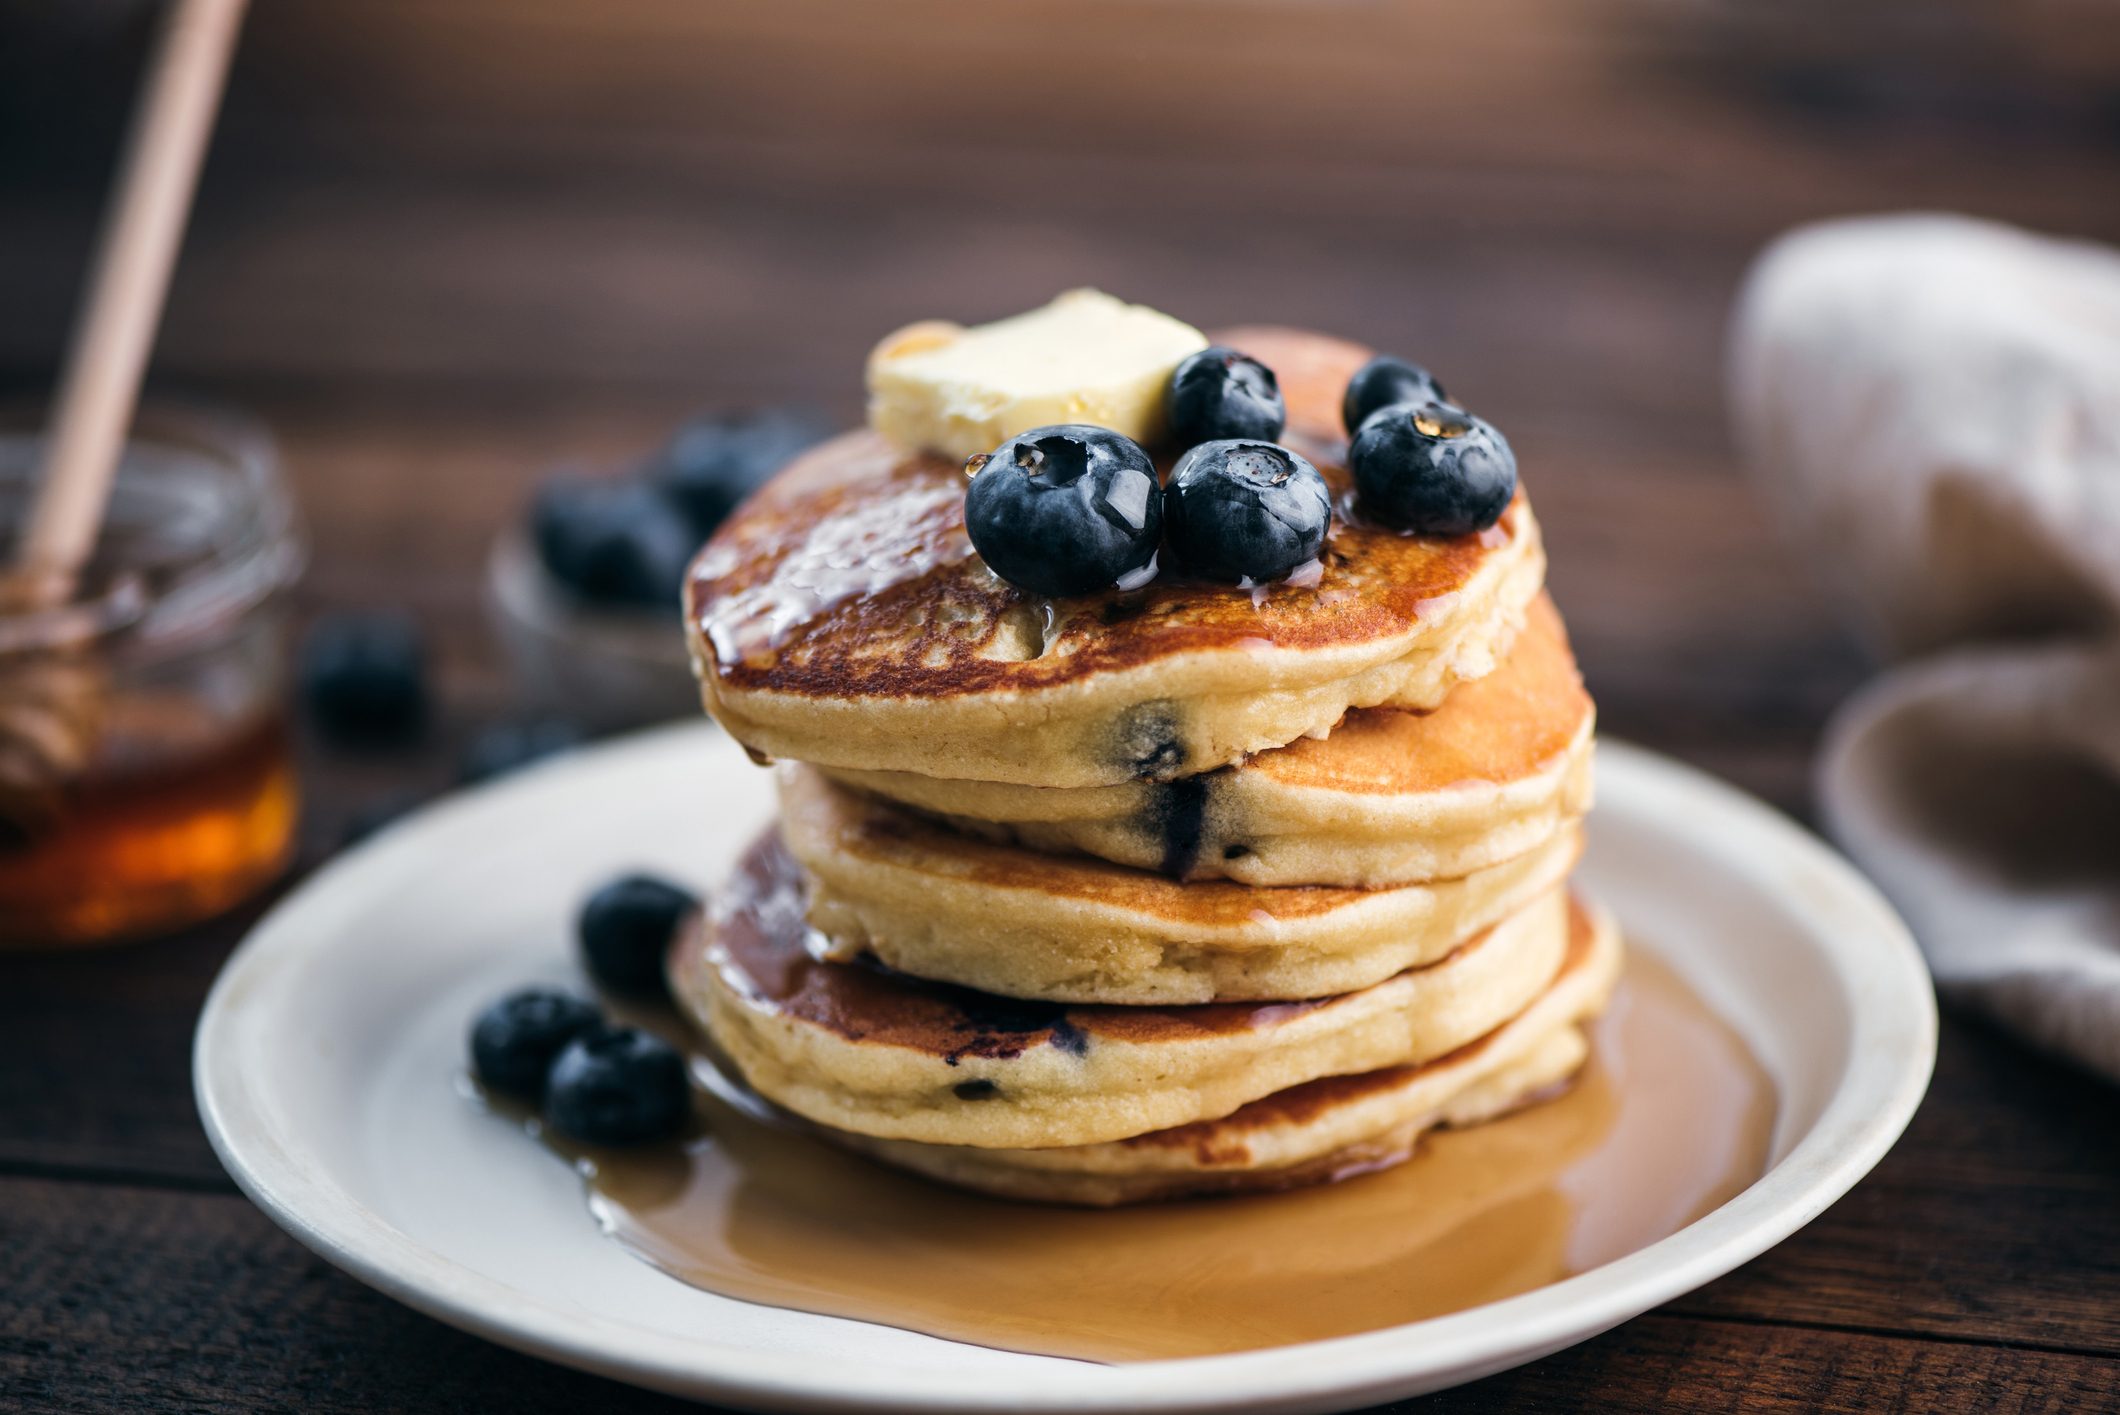 Tasty Blueberry Pancakes With Syrup